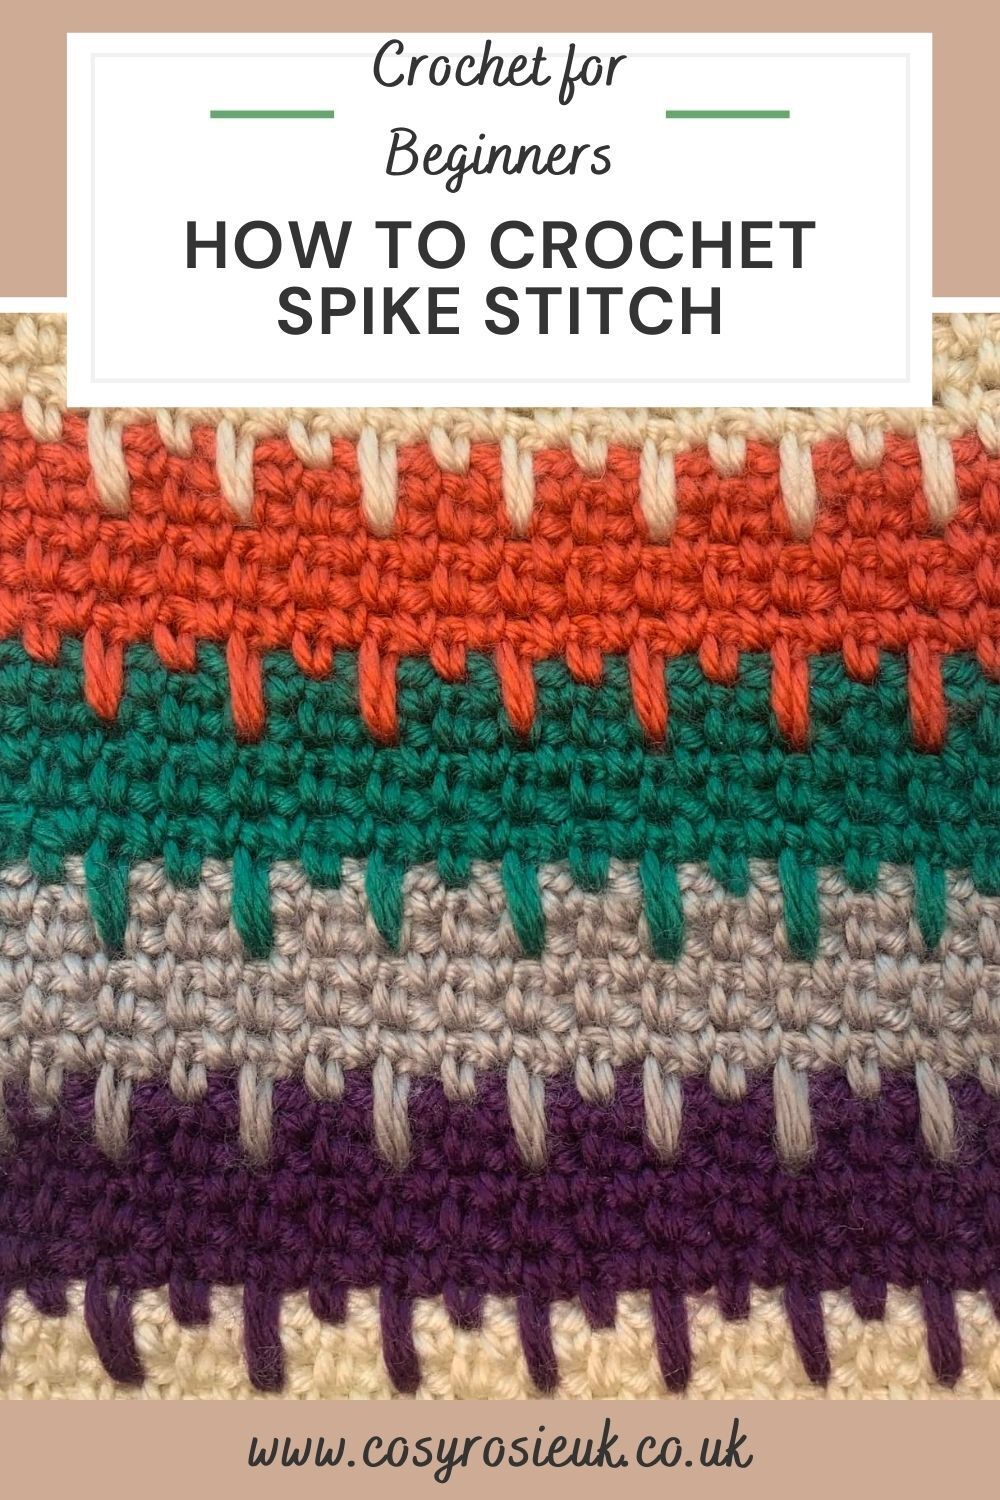 How to crochet the spike stitch with video tutorial